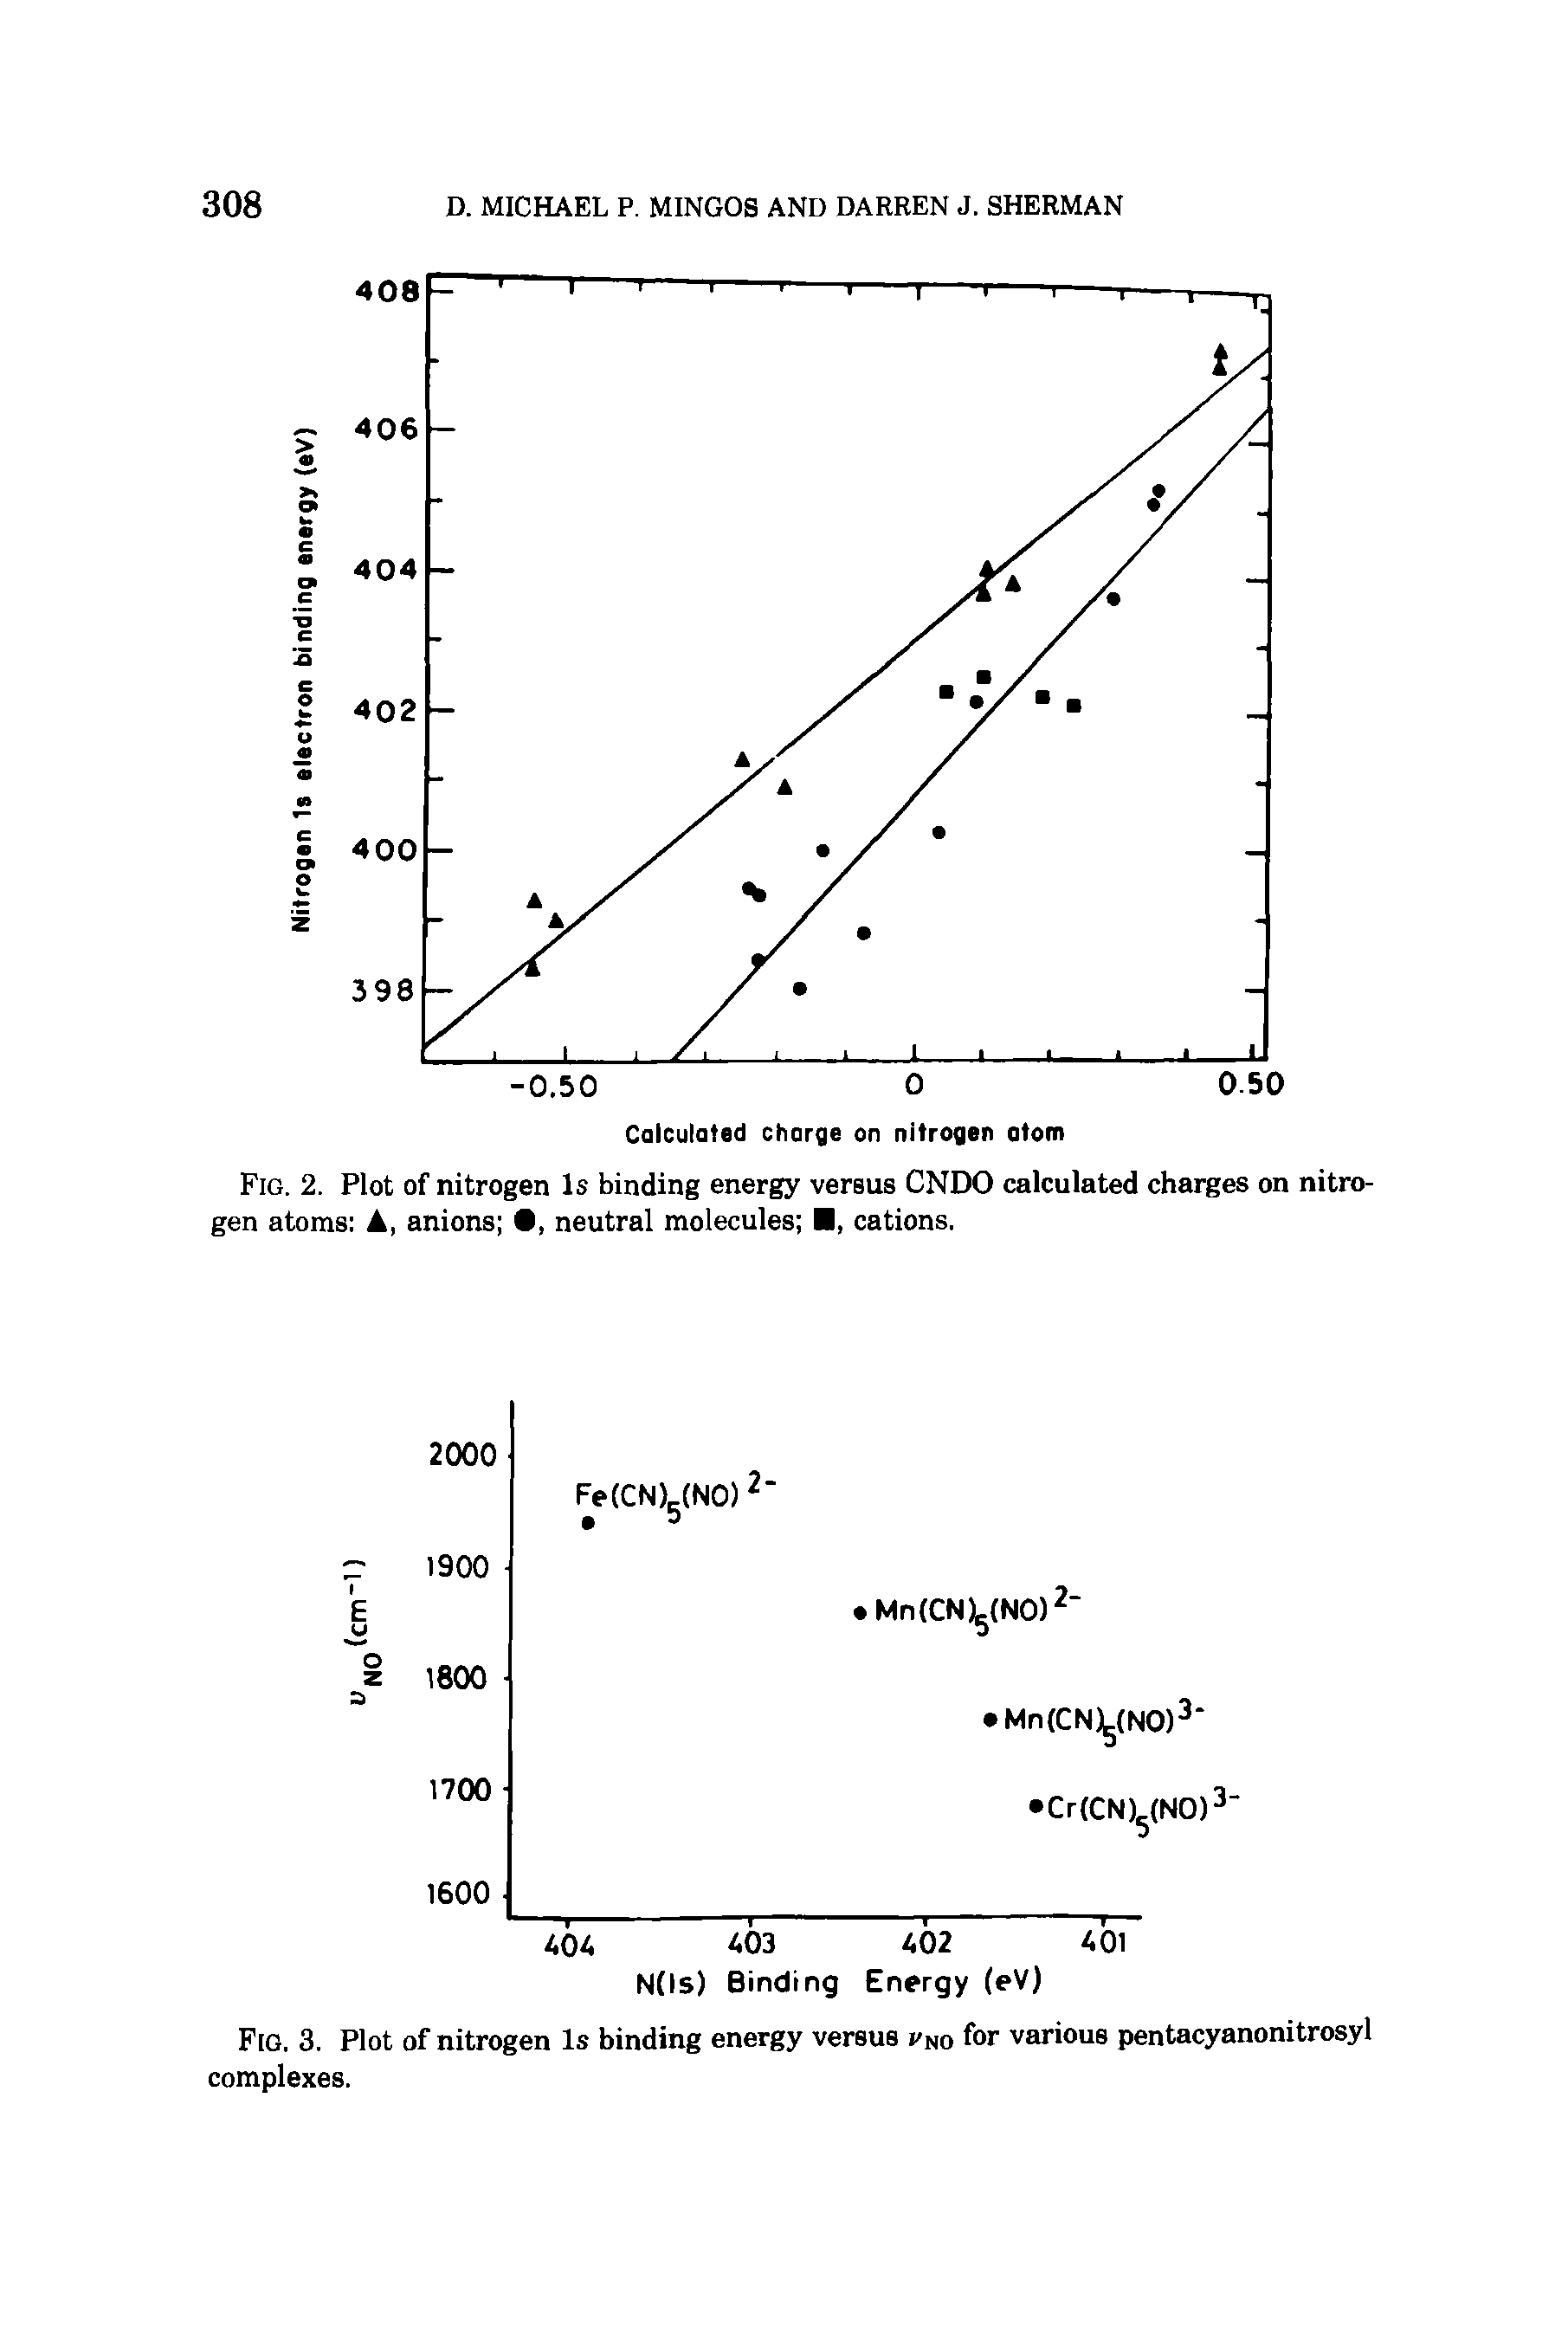 Fig. 2. Plot of nitrogen Is binding energy versus CNDO calculated charges on nitrogen atoms , anions , neutral molecules , cations.